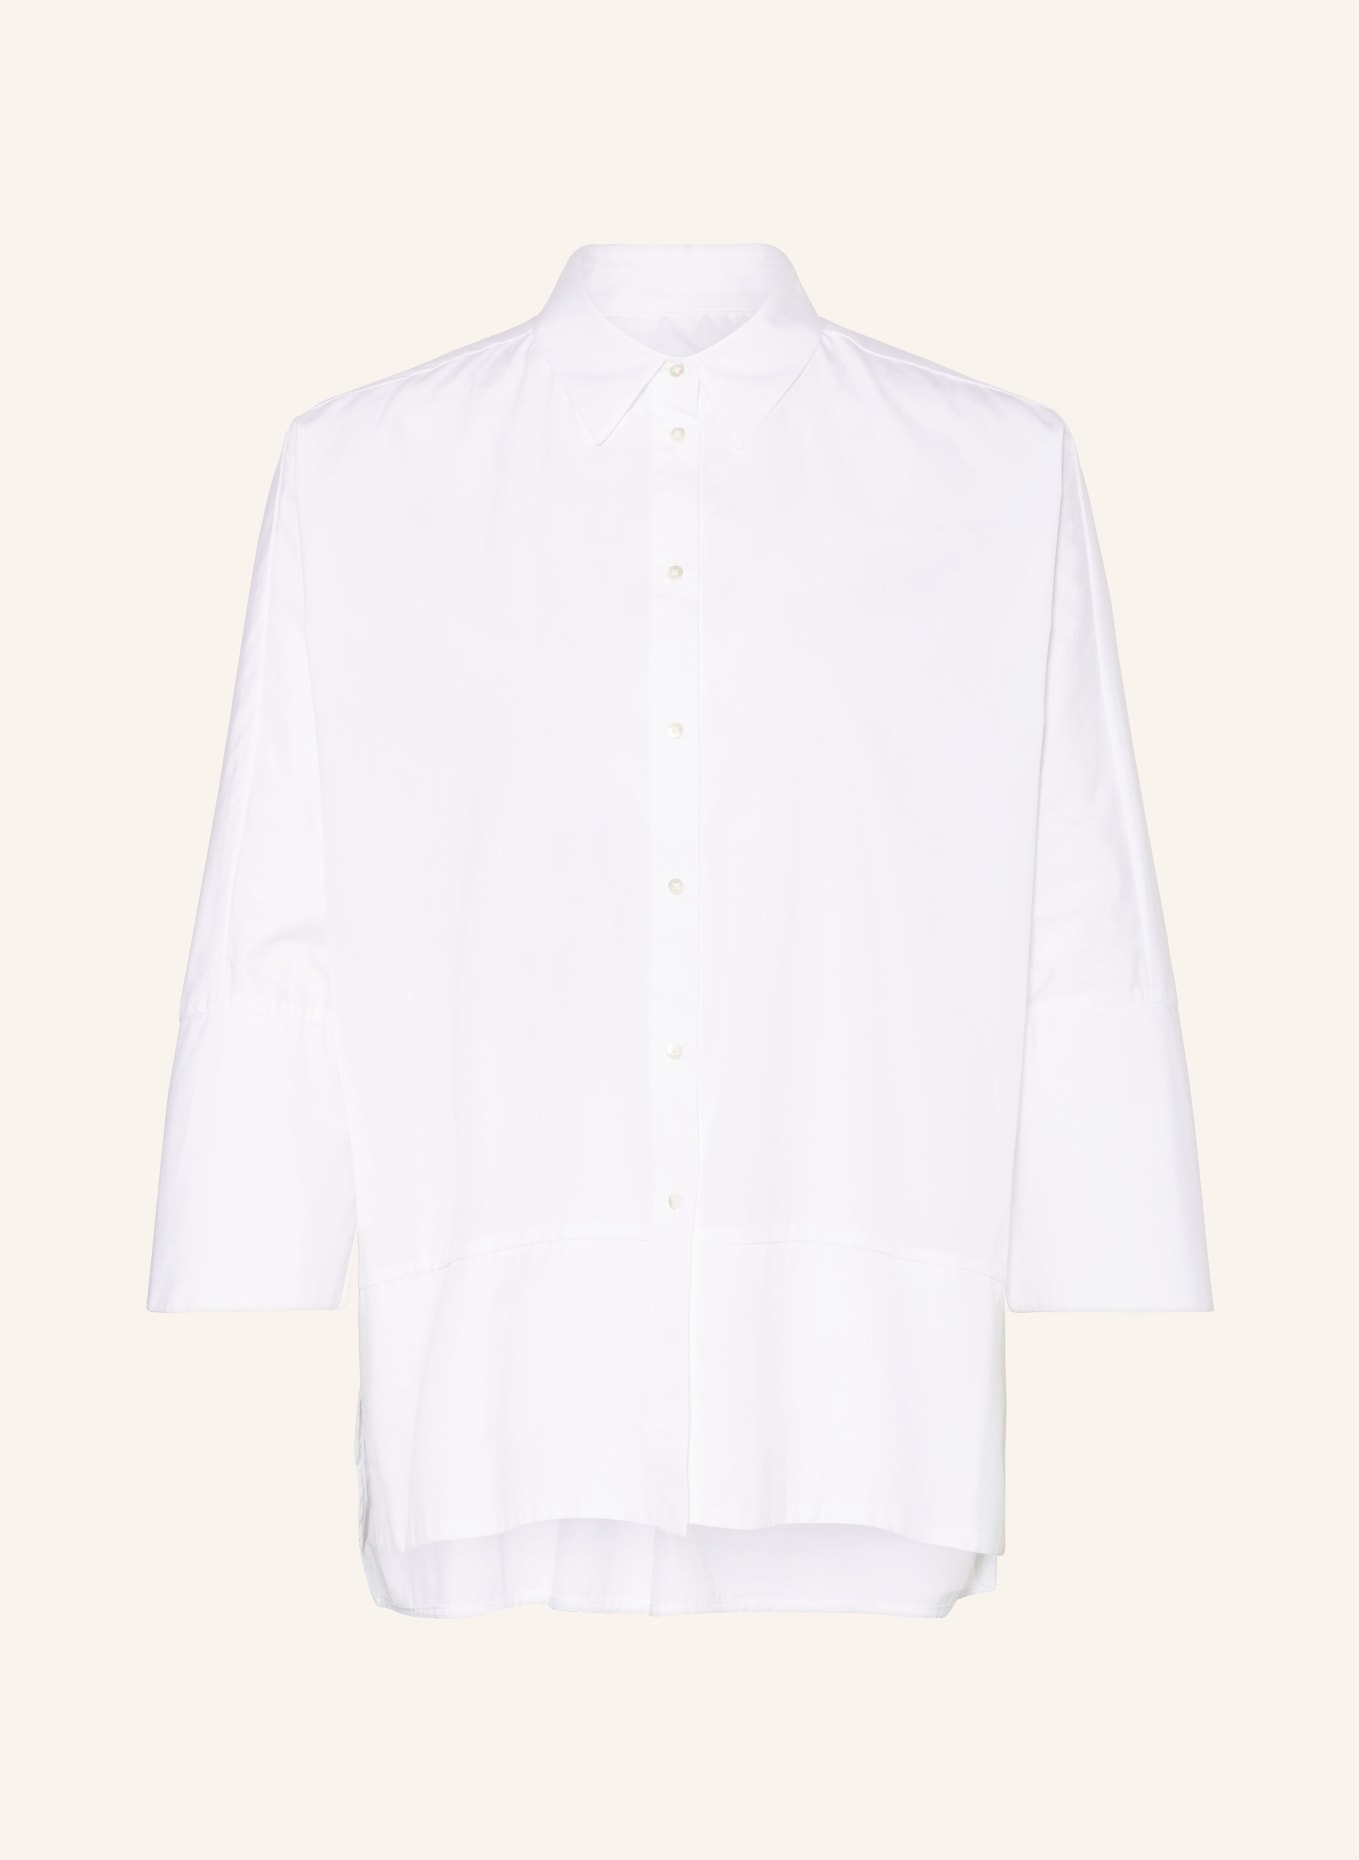 TONNO & PANNA Oversized shirt blouse with 3/4 sleeves, Color: WHITE (Image 1)